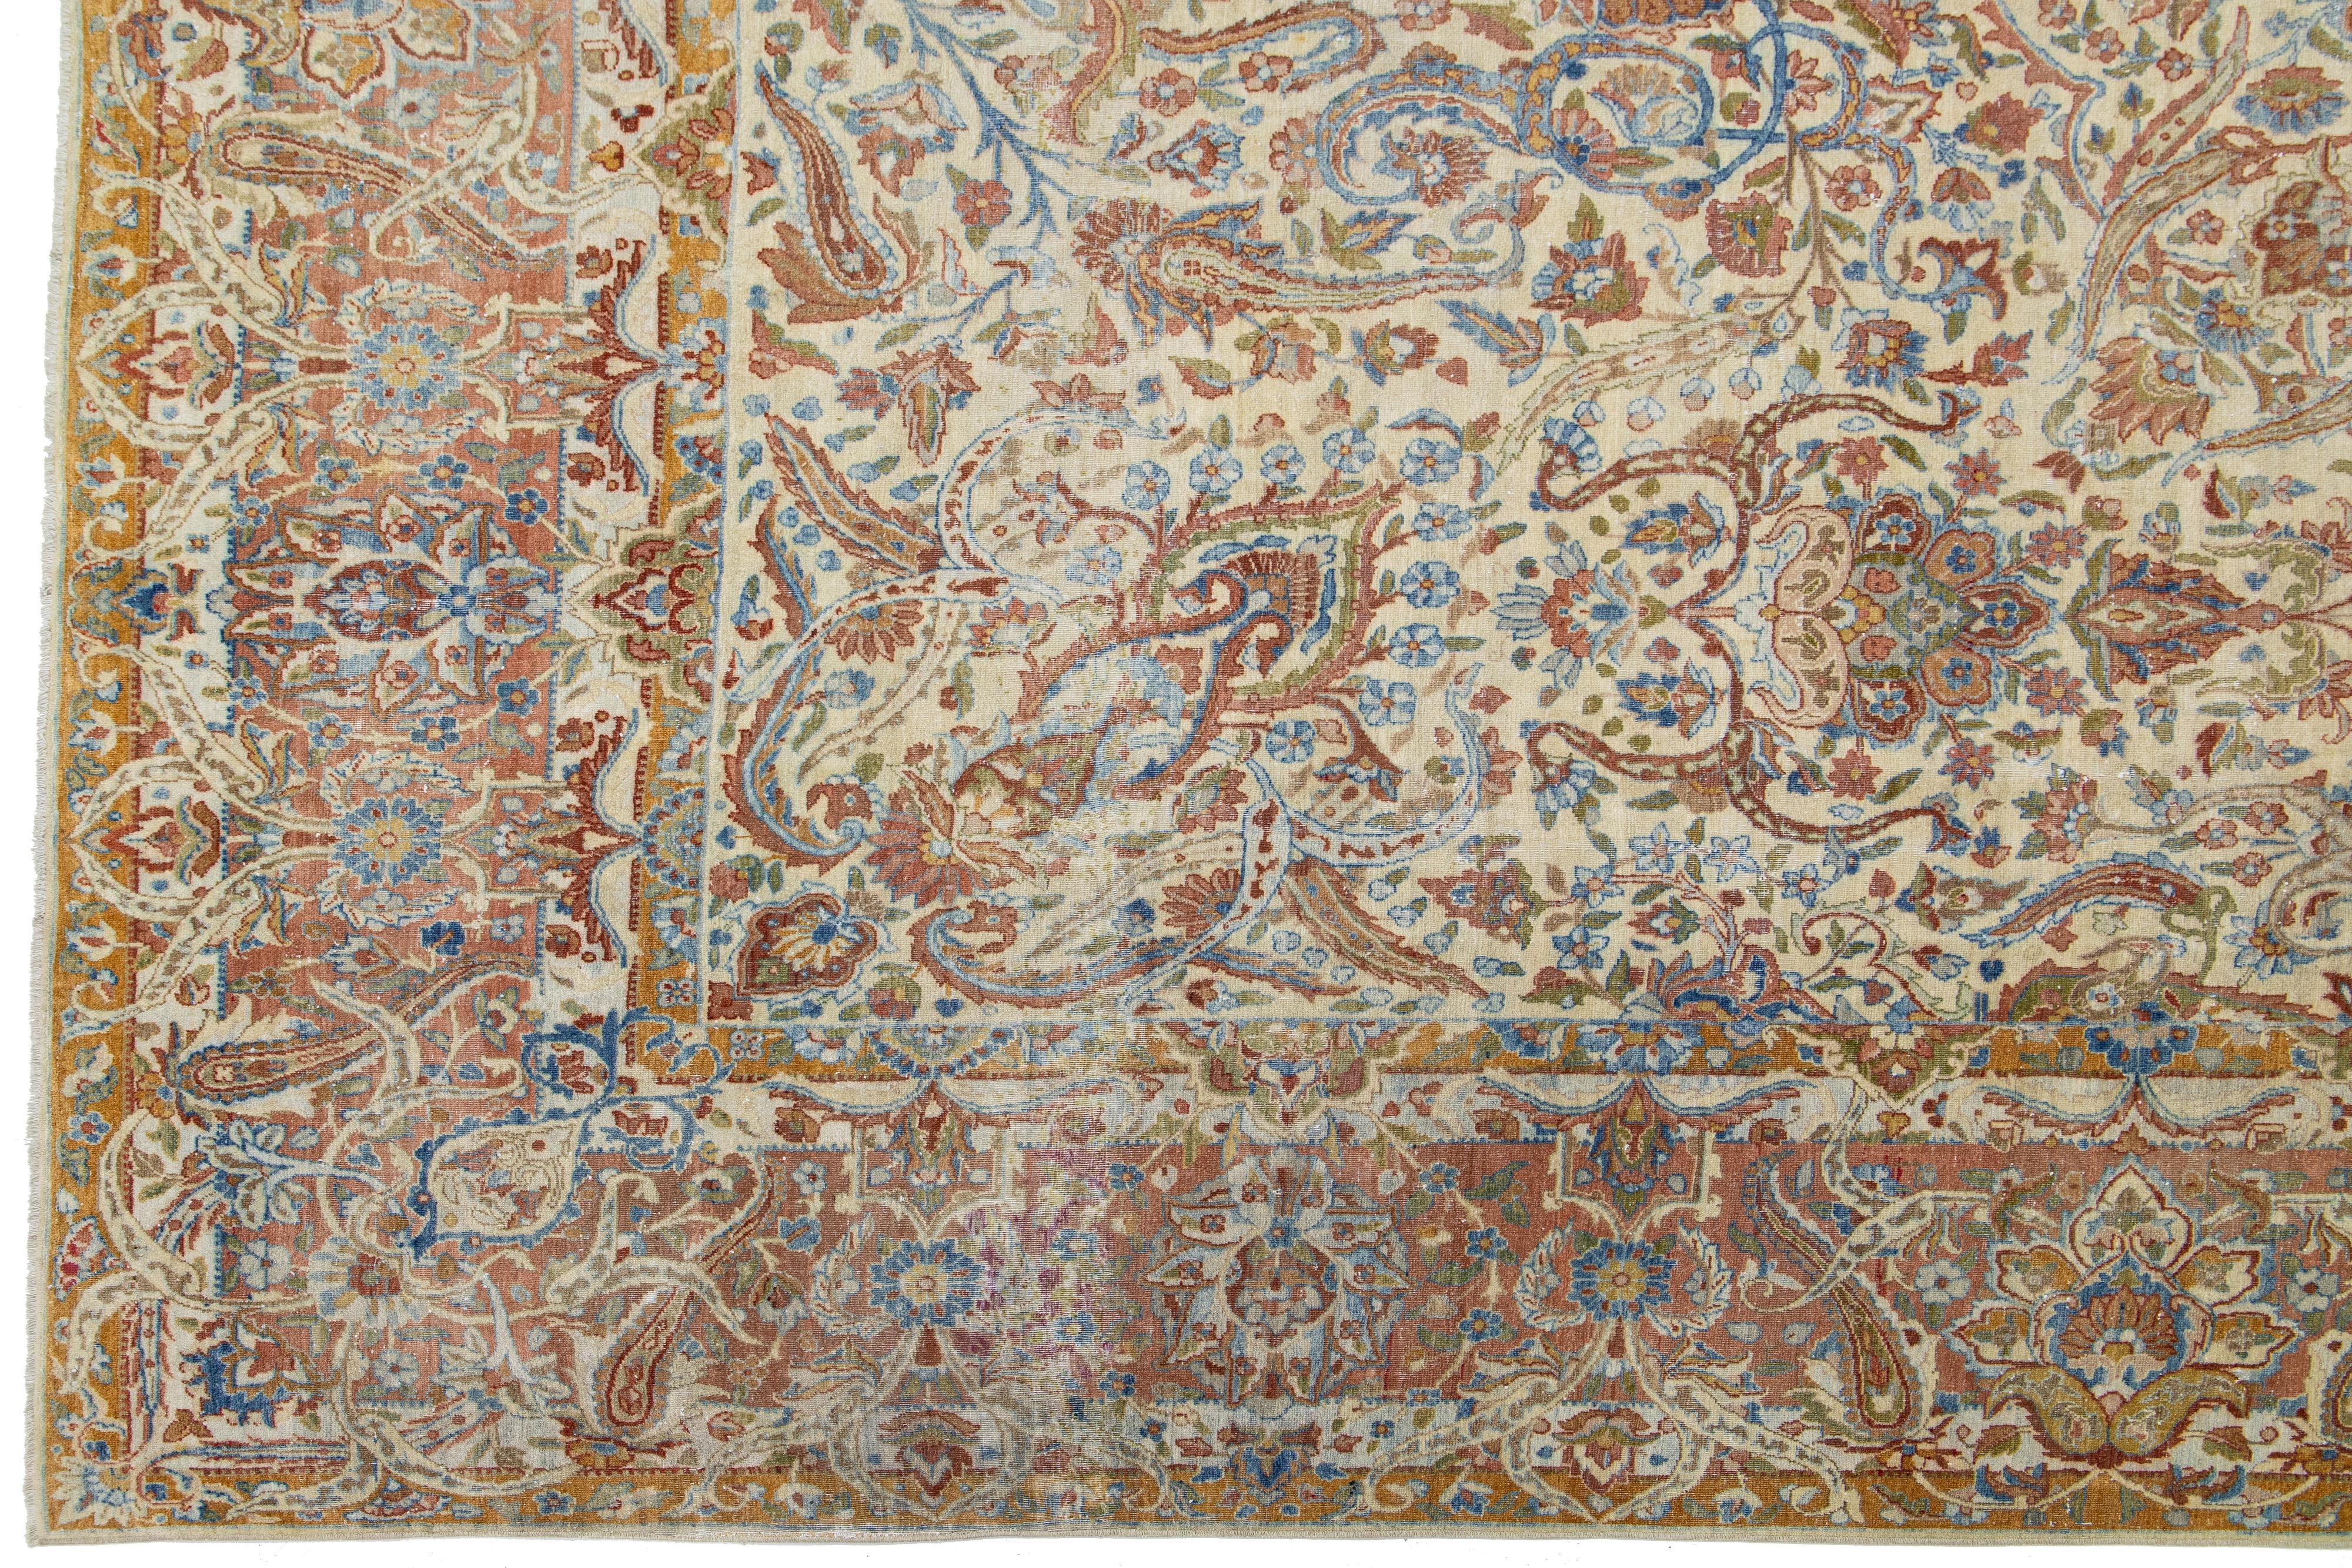 Persian Antique Kerman Handmade Wool Rug with Multicolor Floral Design In Good Condition For Sale In Norwalk, CT